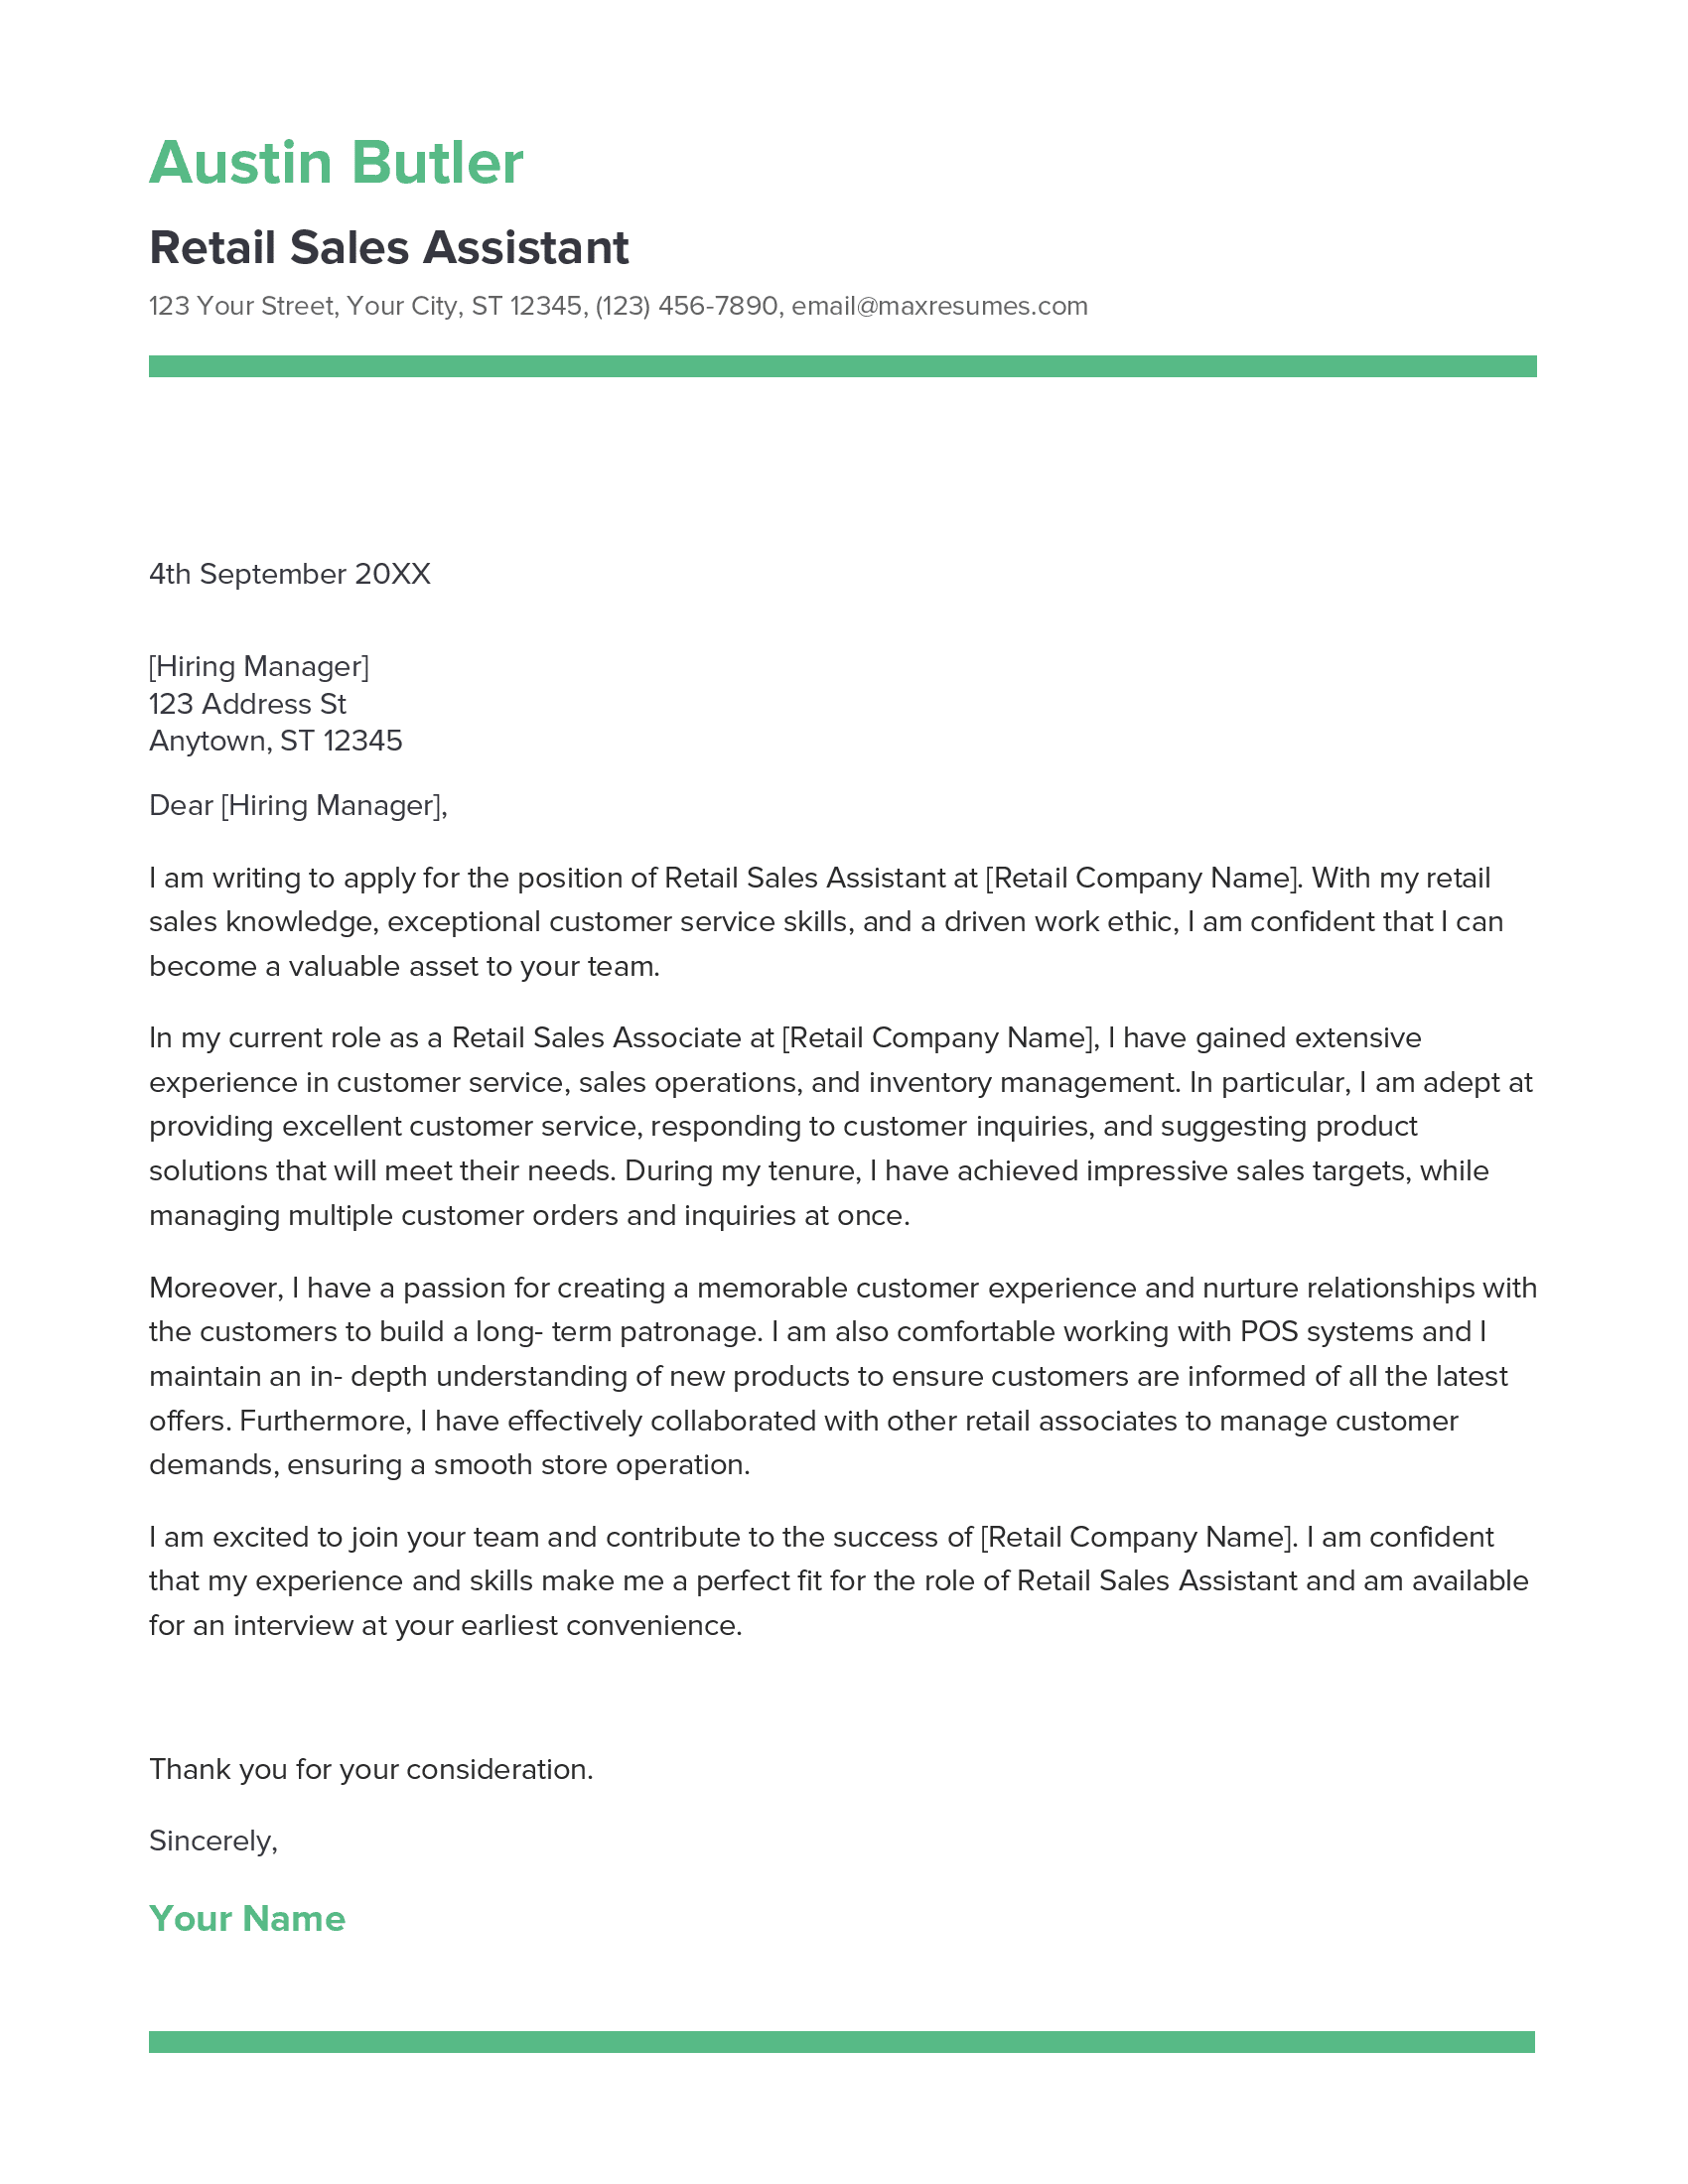 retail sales assistant cover letter no experience